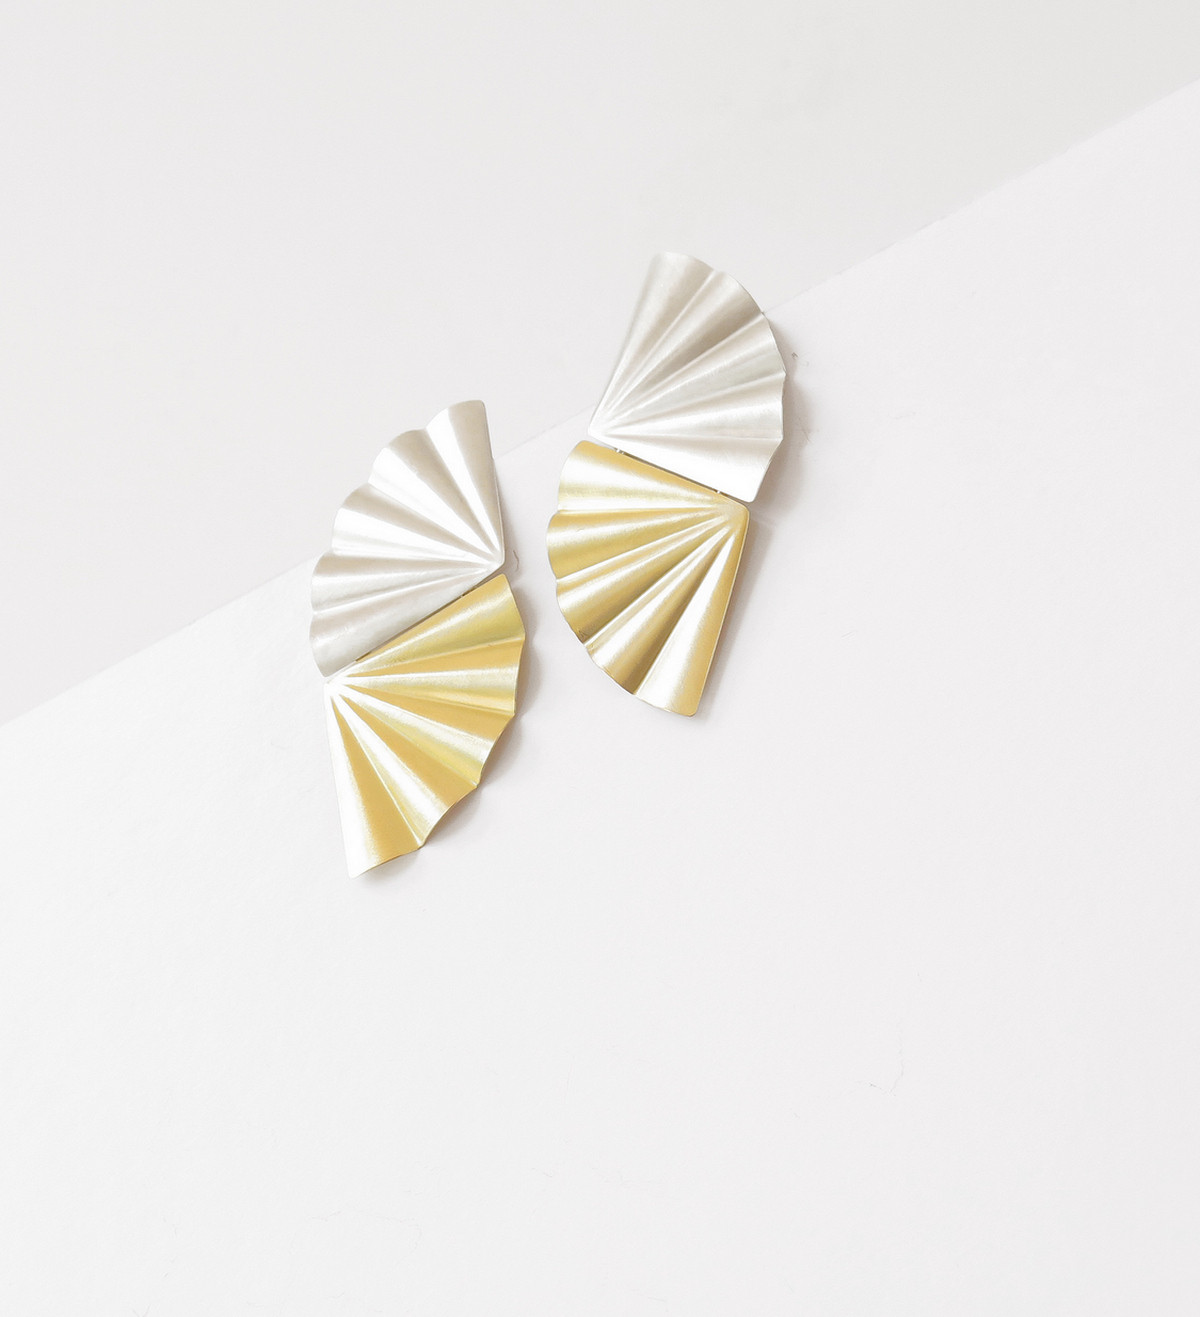 18k gold and silver earrings Maiko 67mm